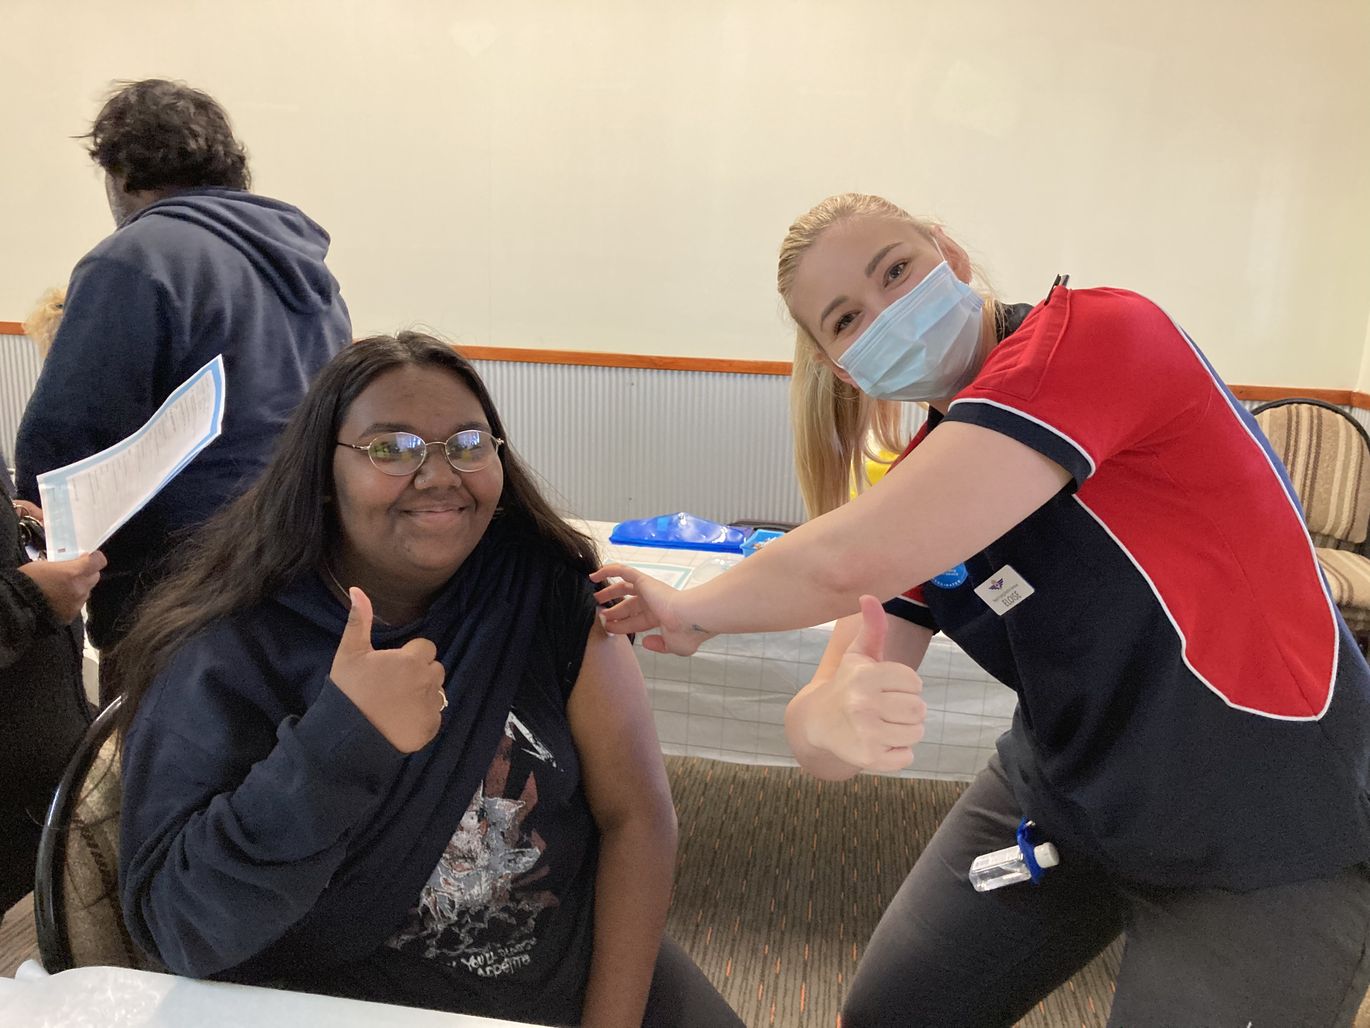 Indigenous Australian in the Kimberley gets vaccinated for COVID19